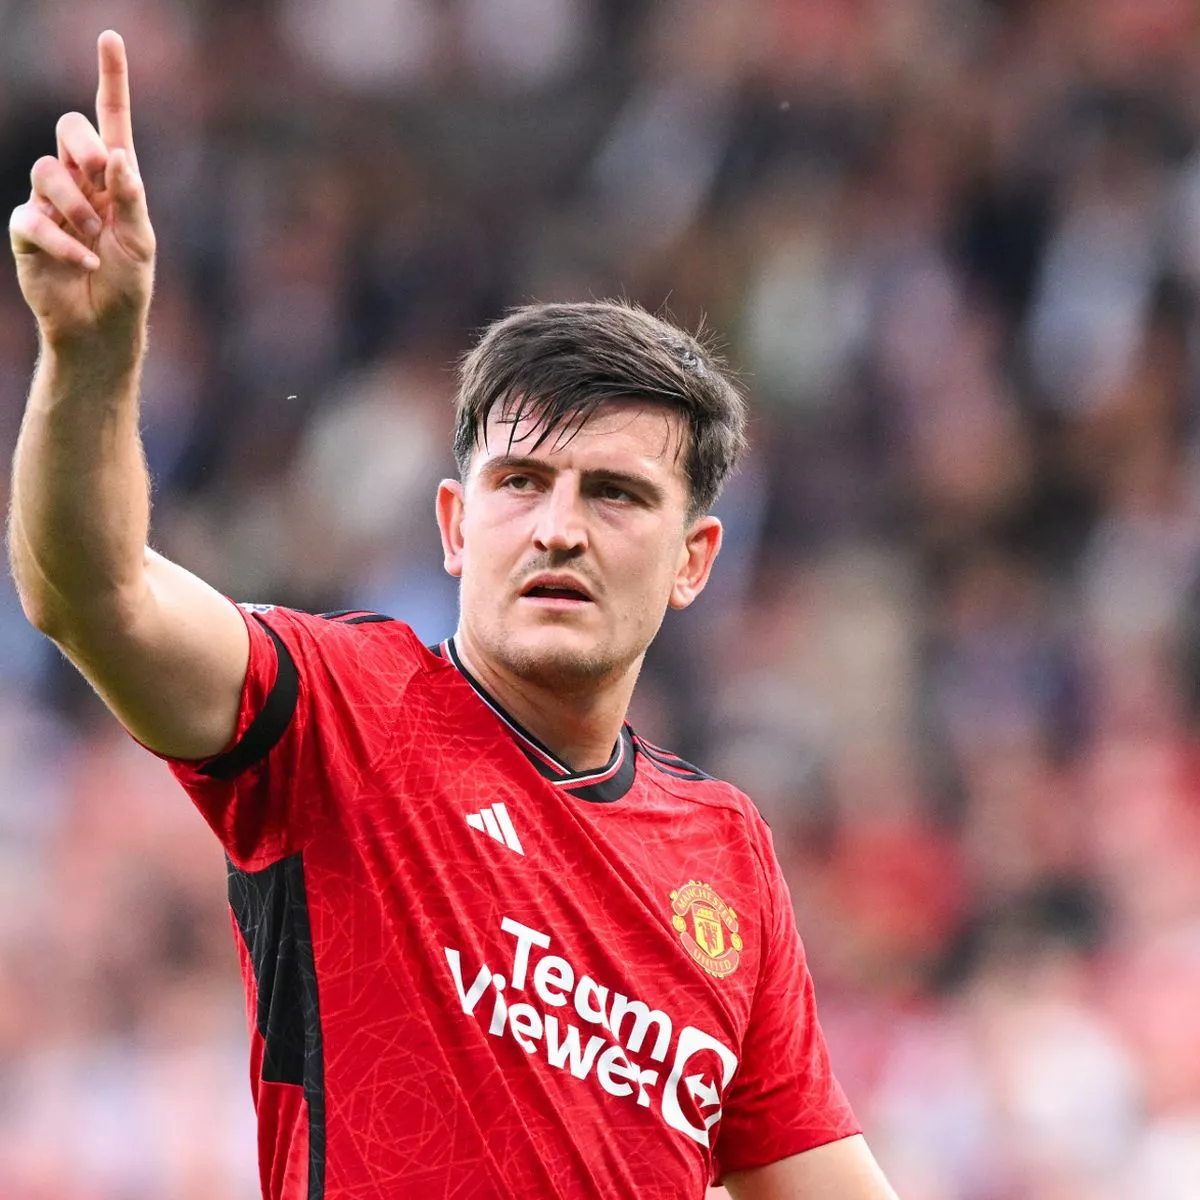 Ghanaian MP Isaac Adongo Apologizes to Harry Maguire for Previous Mockery